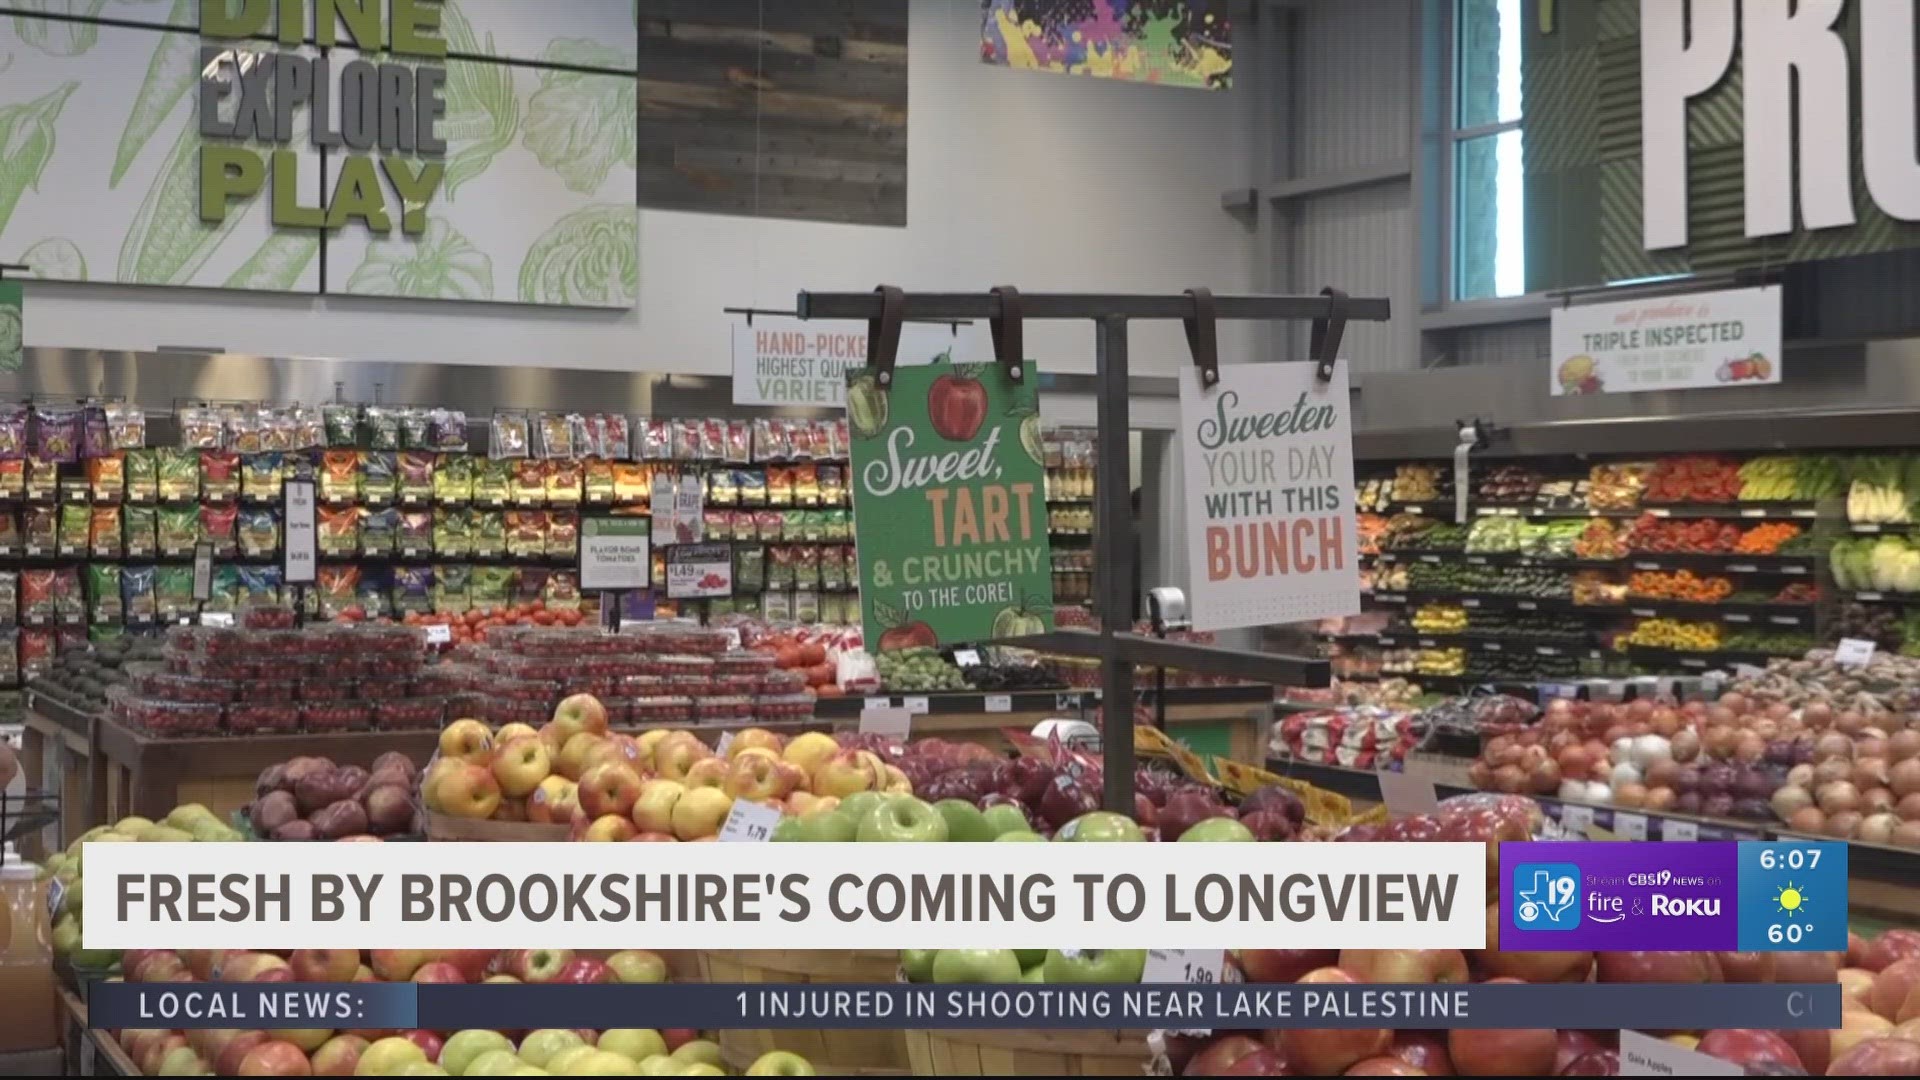 Over the last several years, Brookshire's has purchased several pieces of land in north Longview.